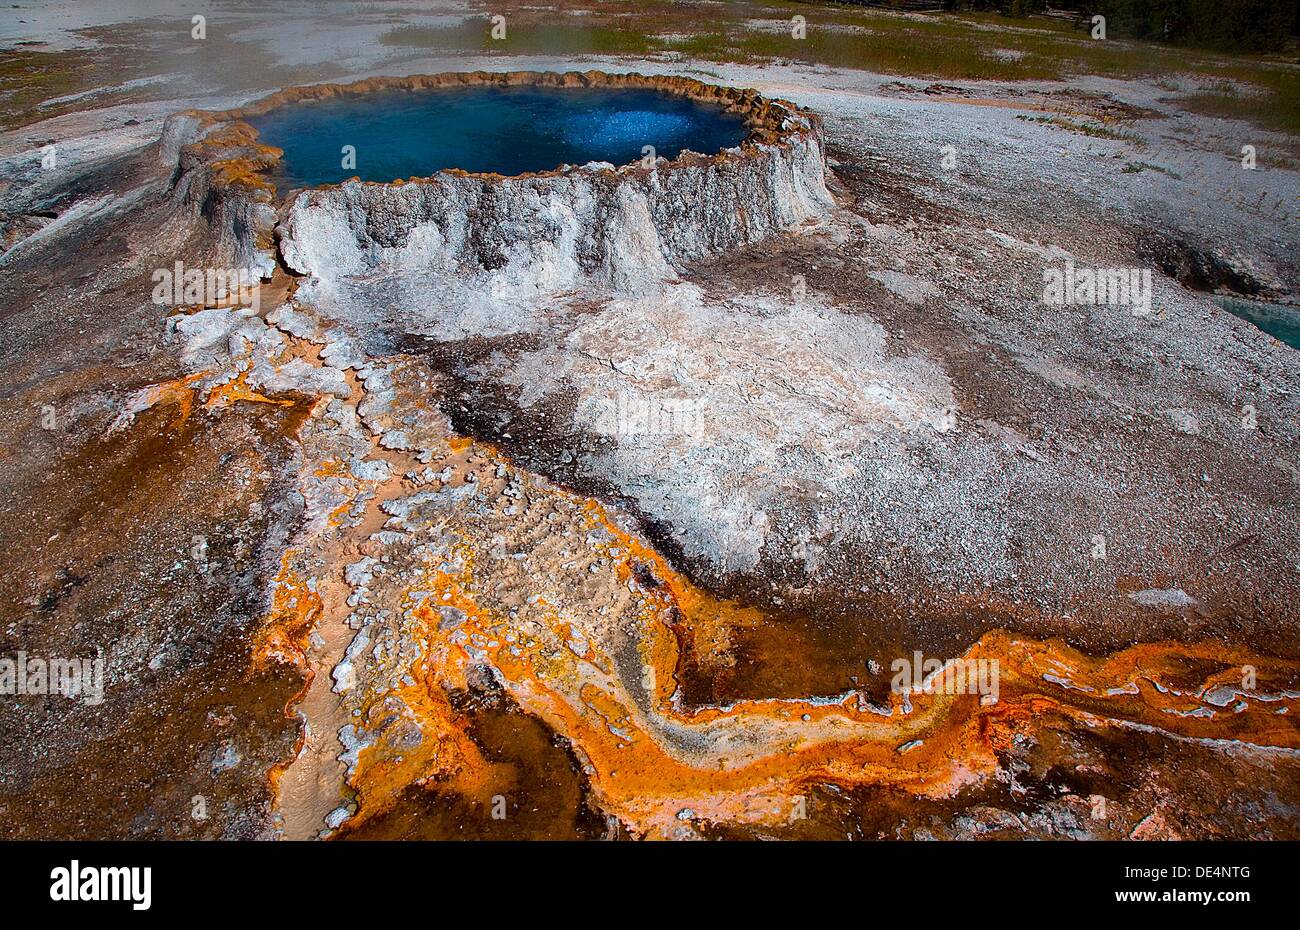 Punchbowl spring produces vivid colors from bacteria in the Upper geyser Basin near Old Faithful at Yellowstone National Park, Stock Photo